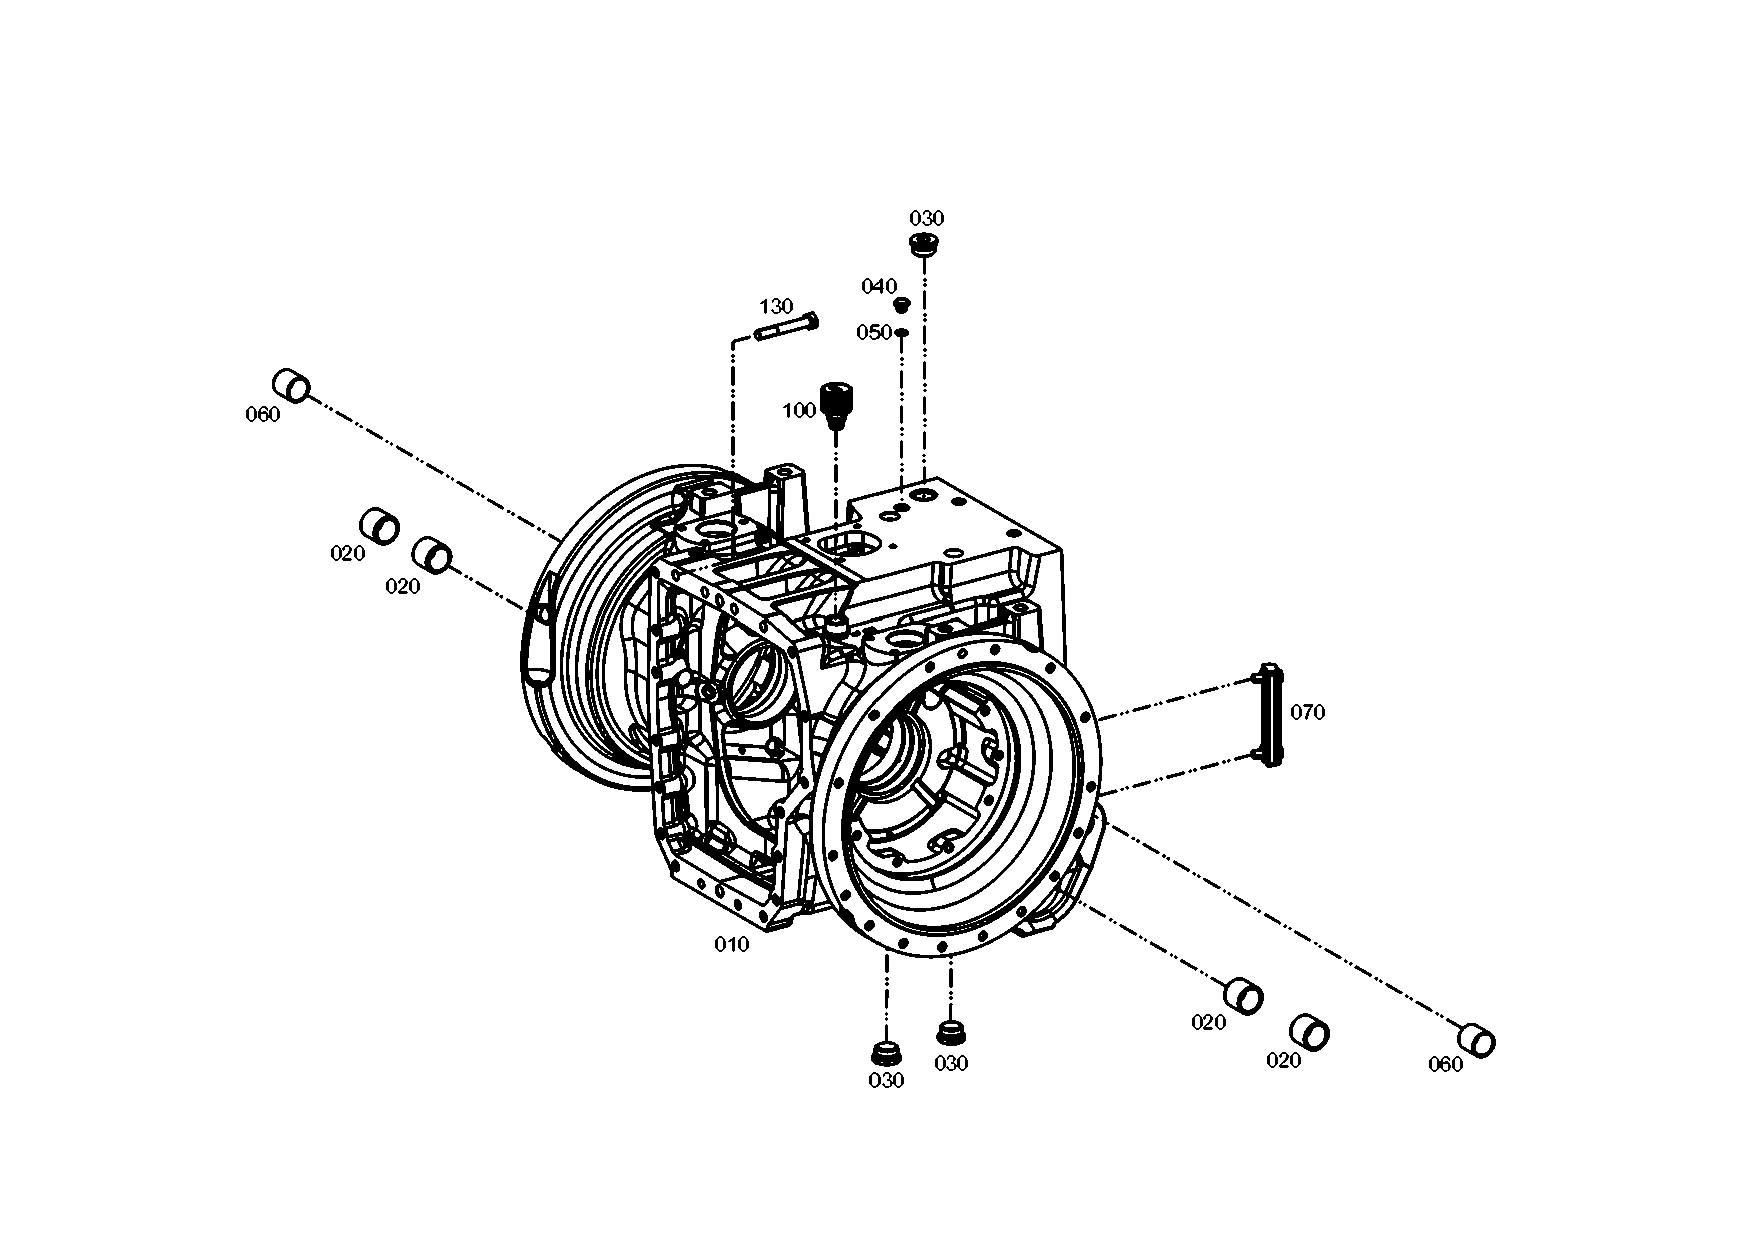 drawing for LIEBHERR GMBH 11001068_2 - OIL SIGHT GLASS (figure 1)